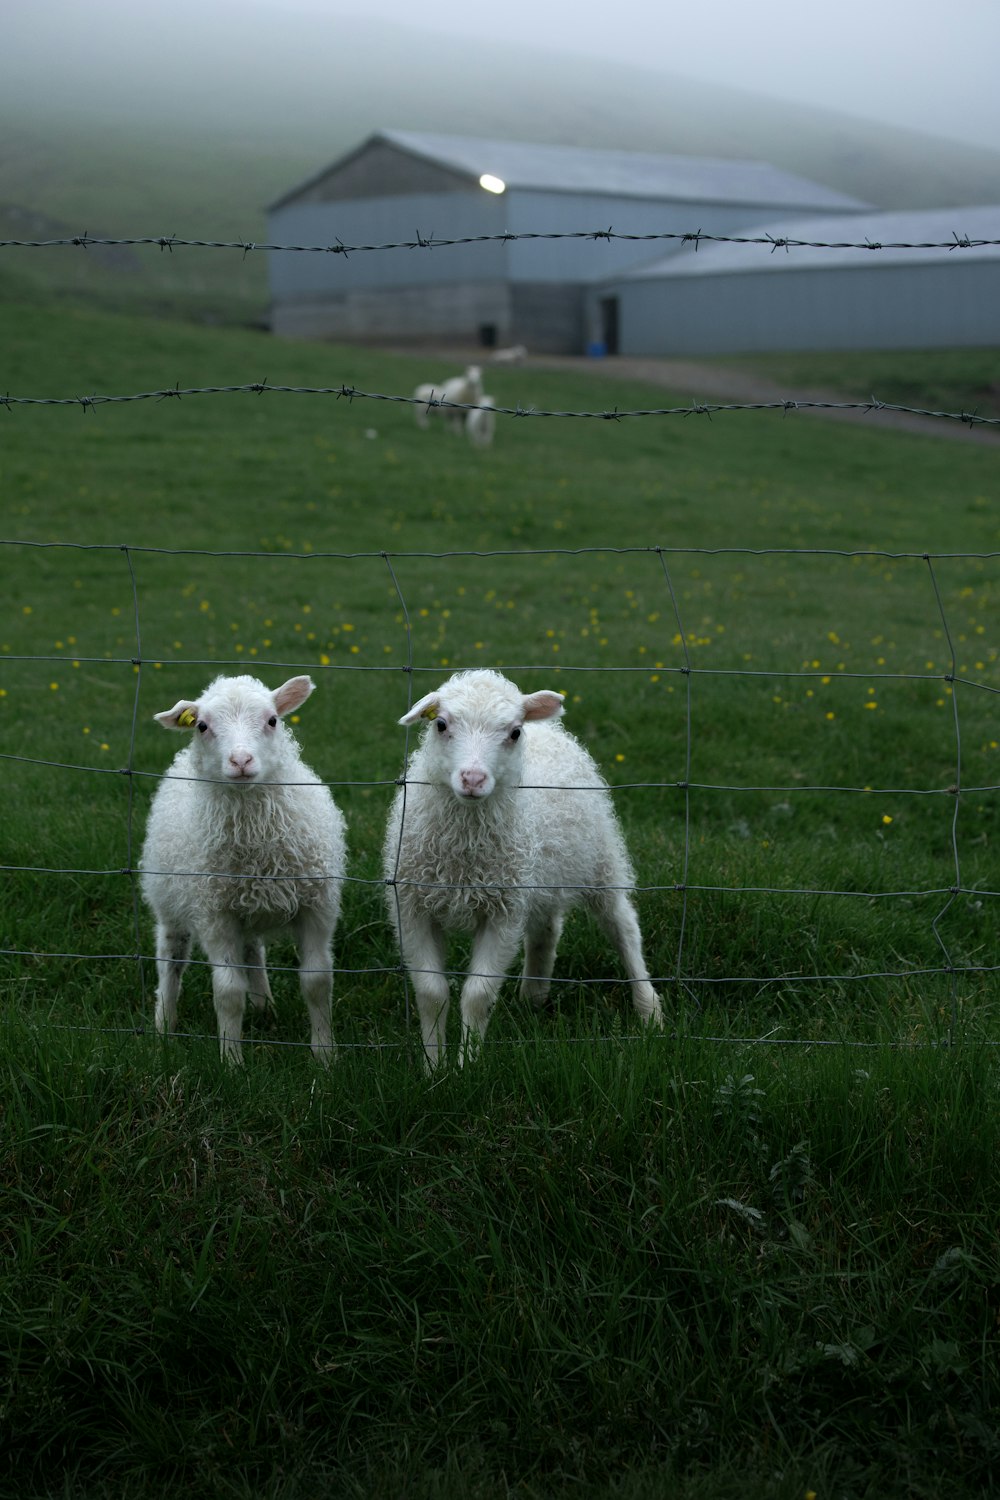 two white sheep standing next to each other on a lush green field